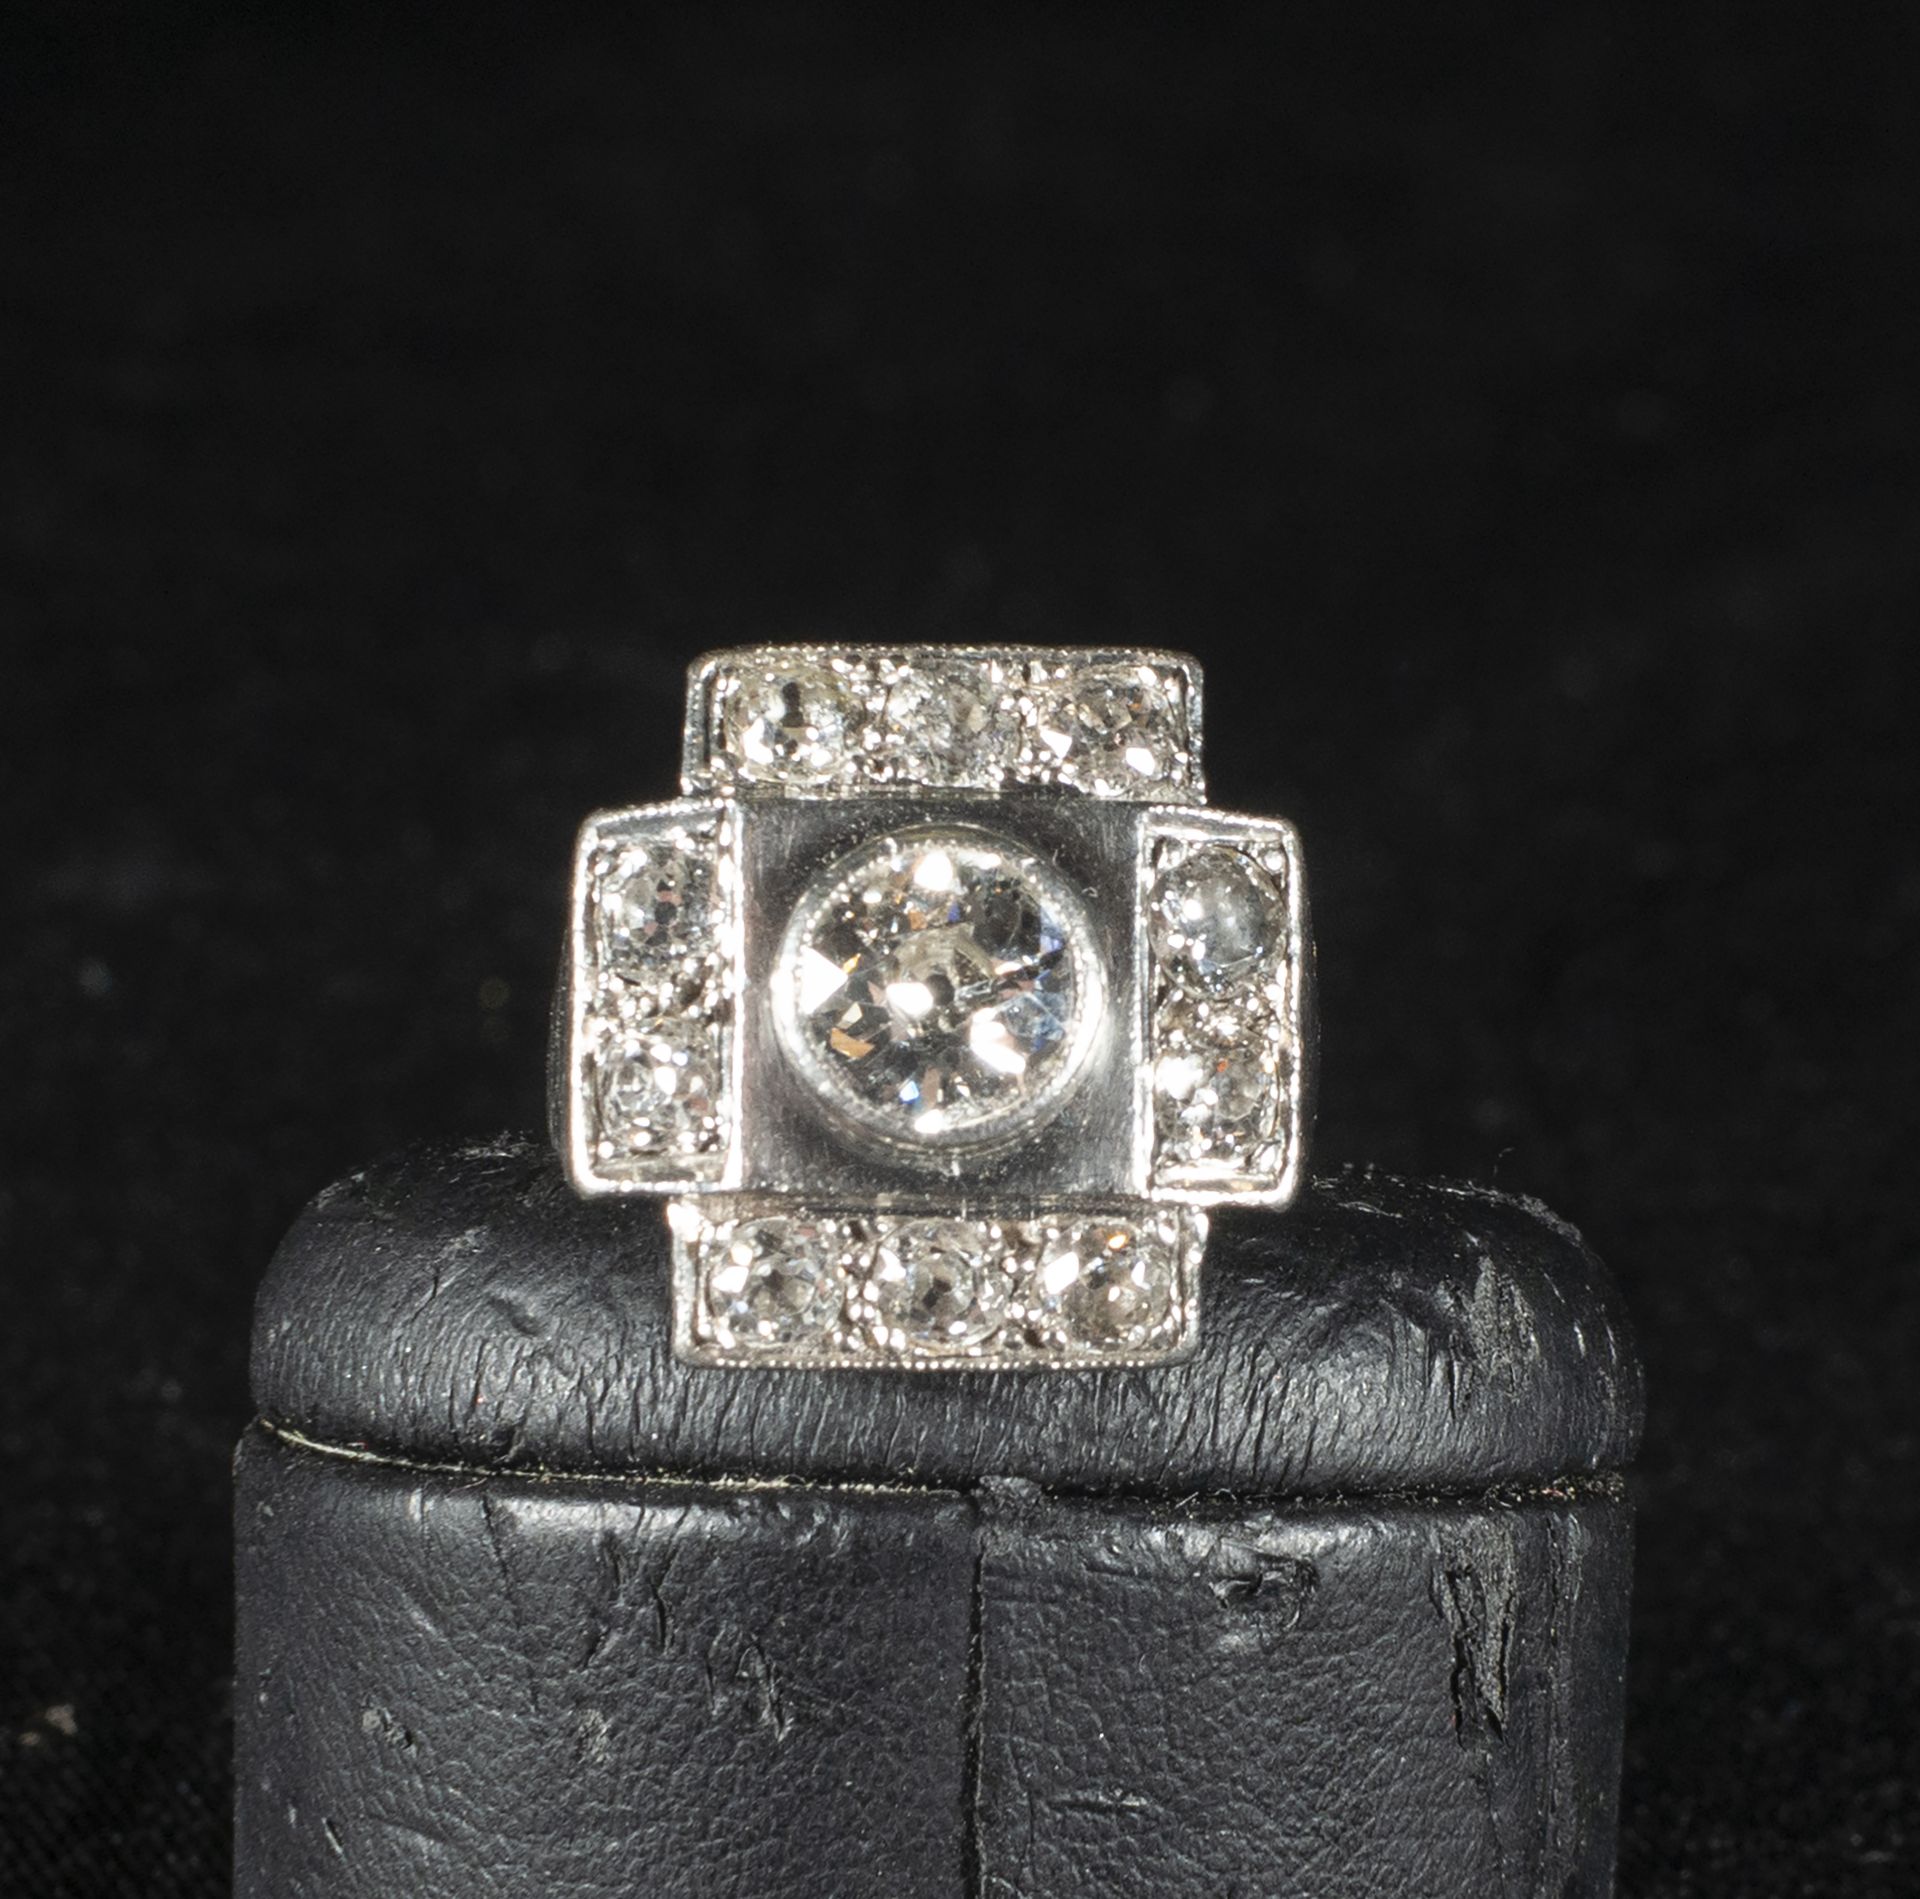 Distinguished Lady's solitaire with a large 1ct central diamond and a 1.2ct border